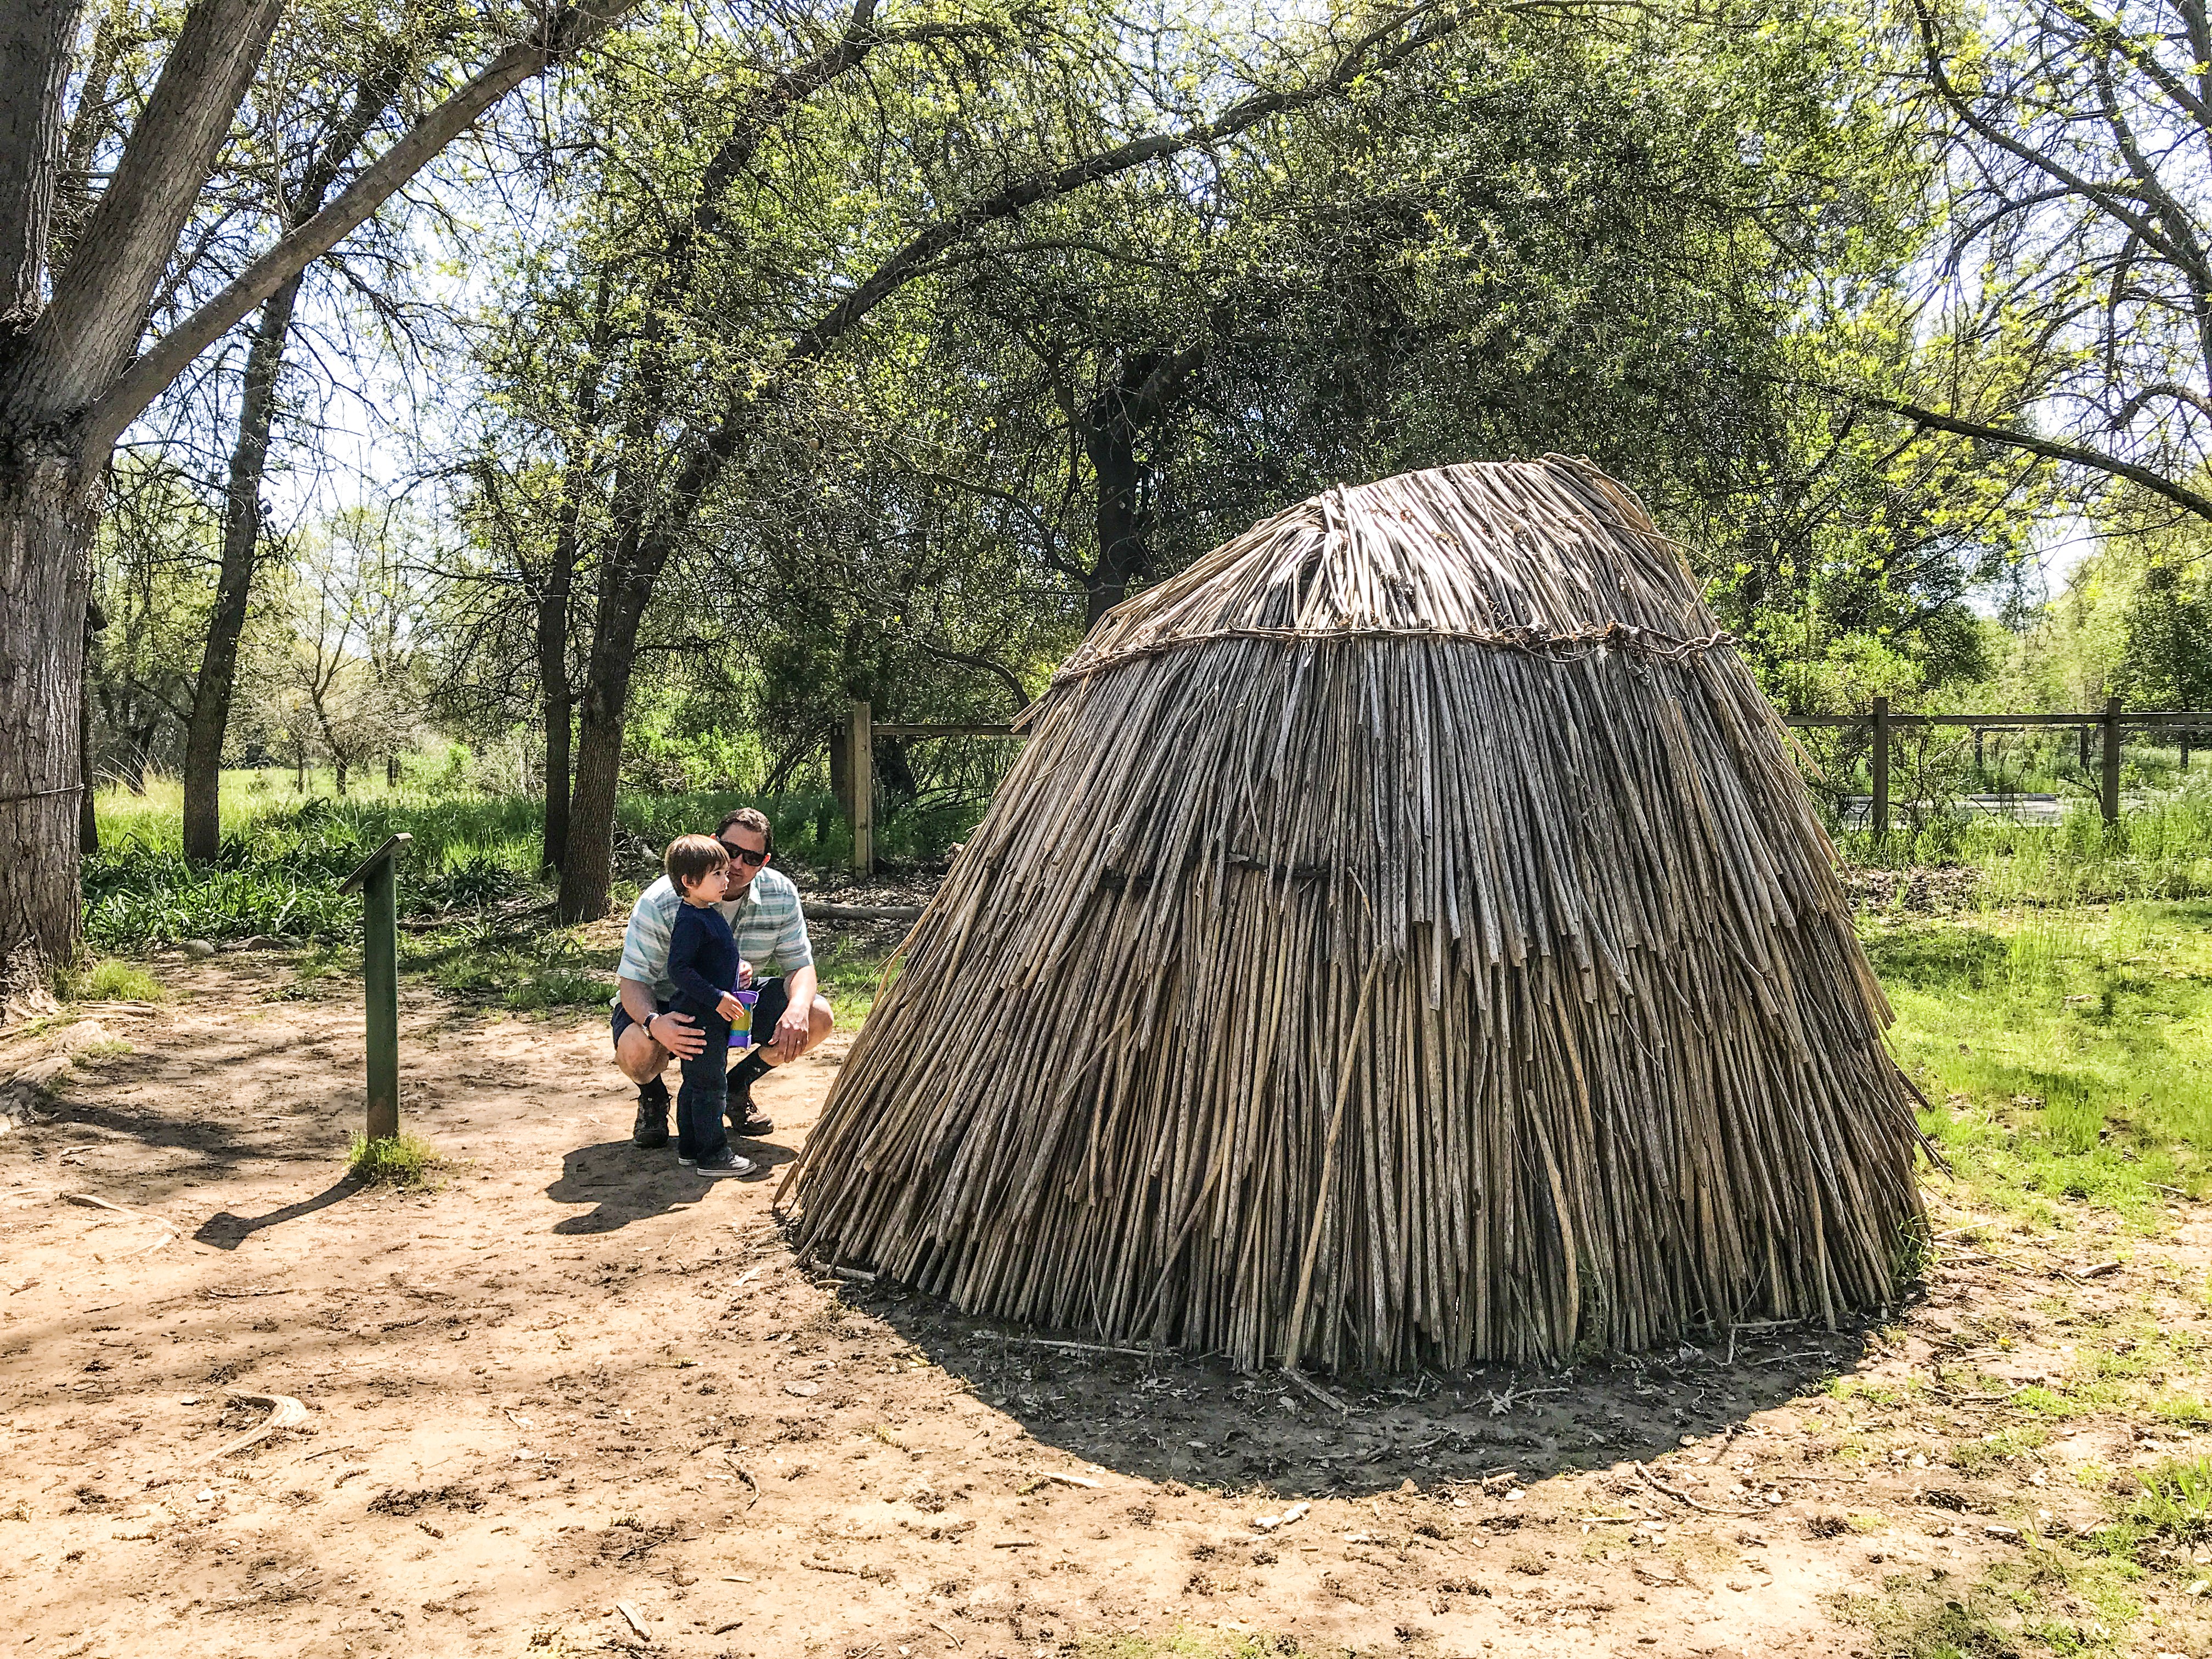 Guide to the Effie Yeaw Nature Center in Sacramento | Things to Do in Sacramento with Kids | Henry and Andrew’s Guide (www.henryandandrewsguide.com)